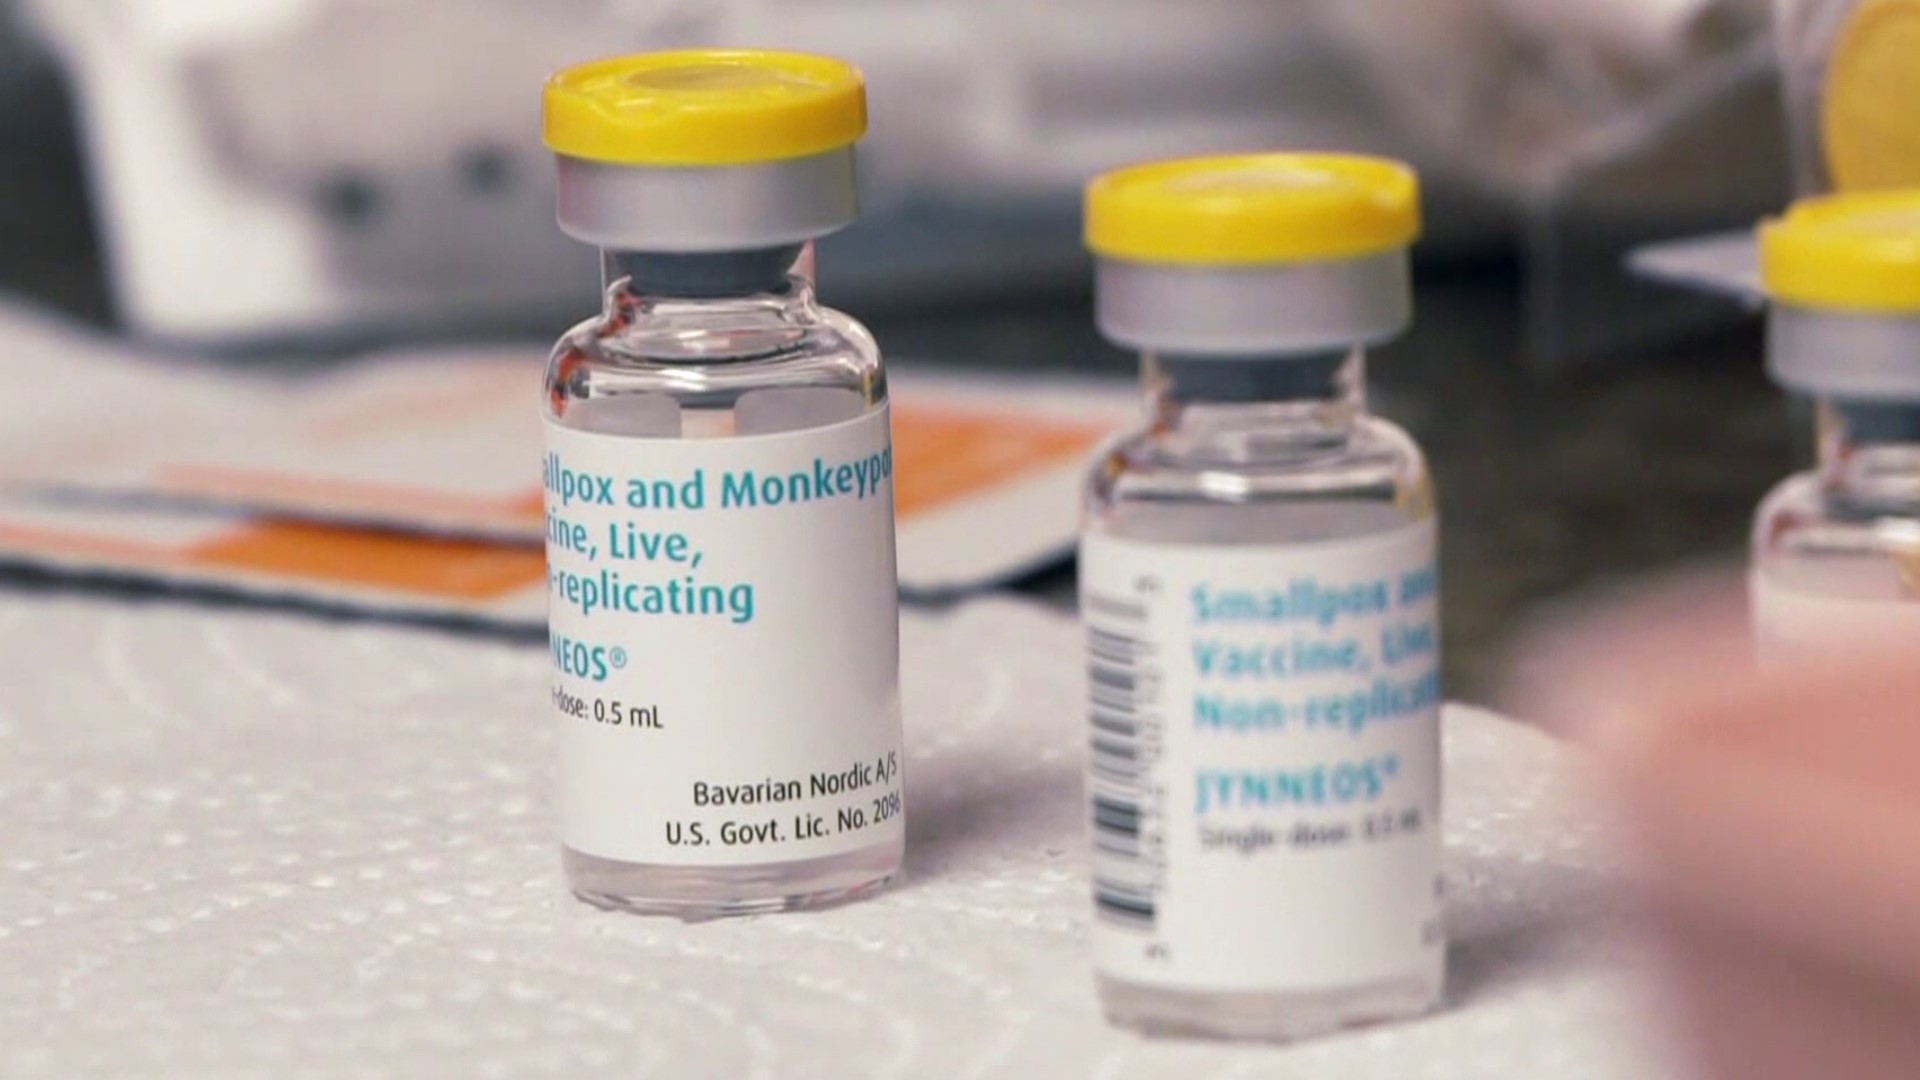 In the past week, five more cases of monkeypox have been confirmed in Arkansas, totaling 20 so far.